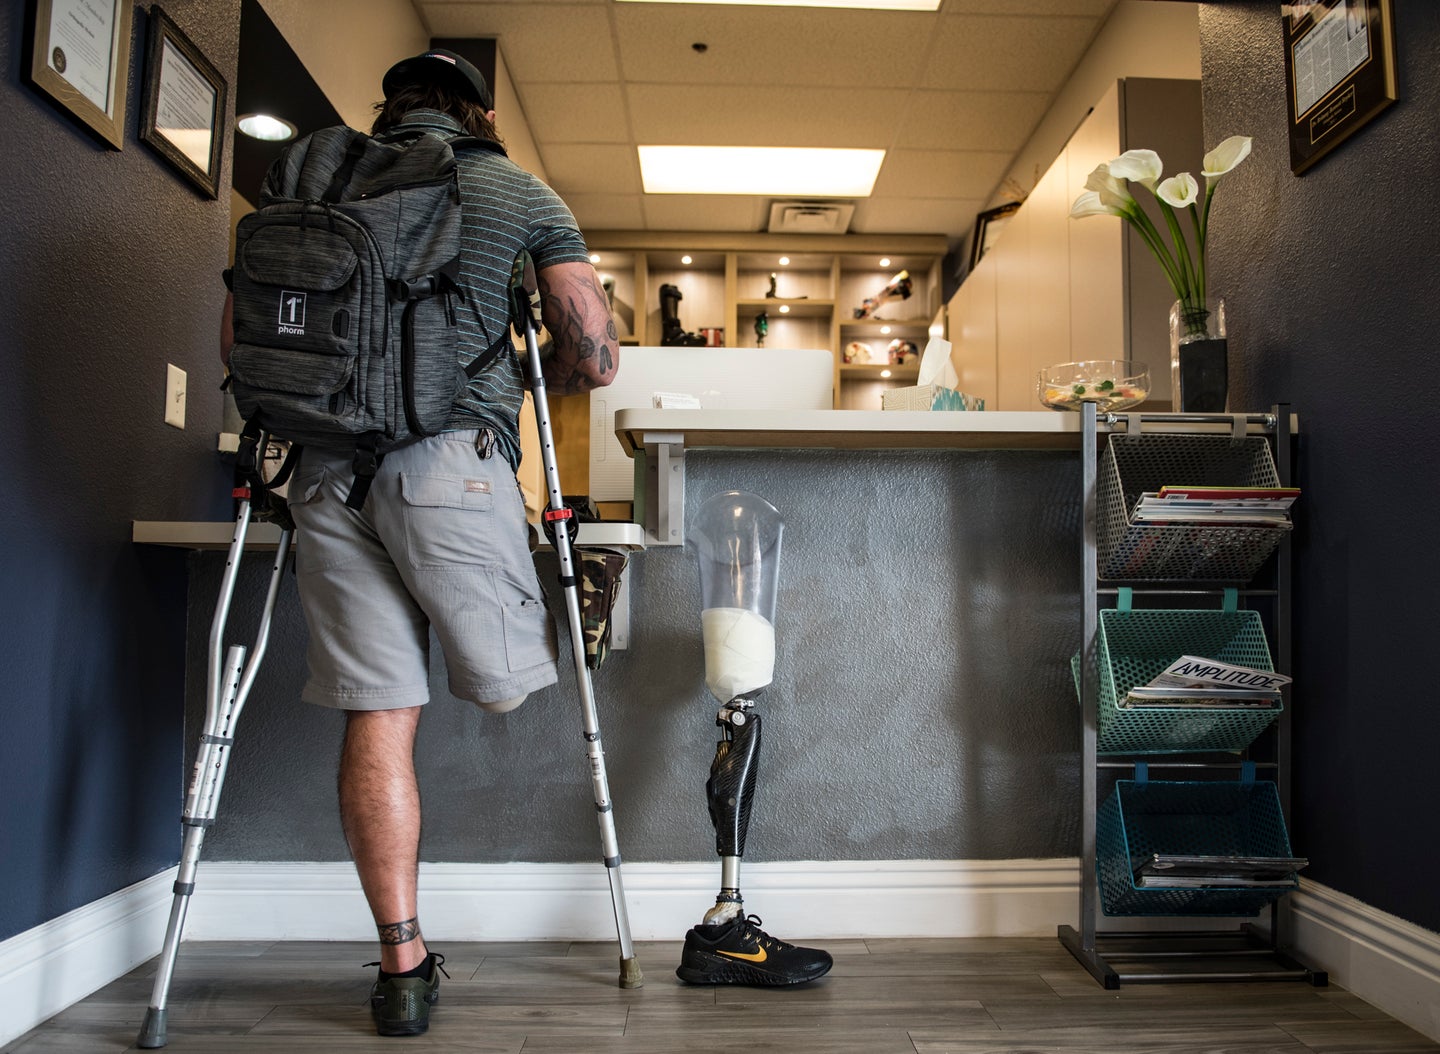 Retired U.S. Army SGT Derek Weida checks out at the front desk of a prosthetic clinic in Las Vegas April 19, 2018. Weida was fitted for a new prosthetic leg to accommodate his growing leg muscle due to weight training in the gym. (U.S. Air Force photo by Airman 1st Class Andrew D. Sarver)